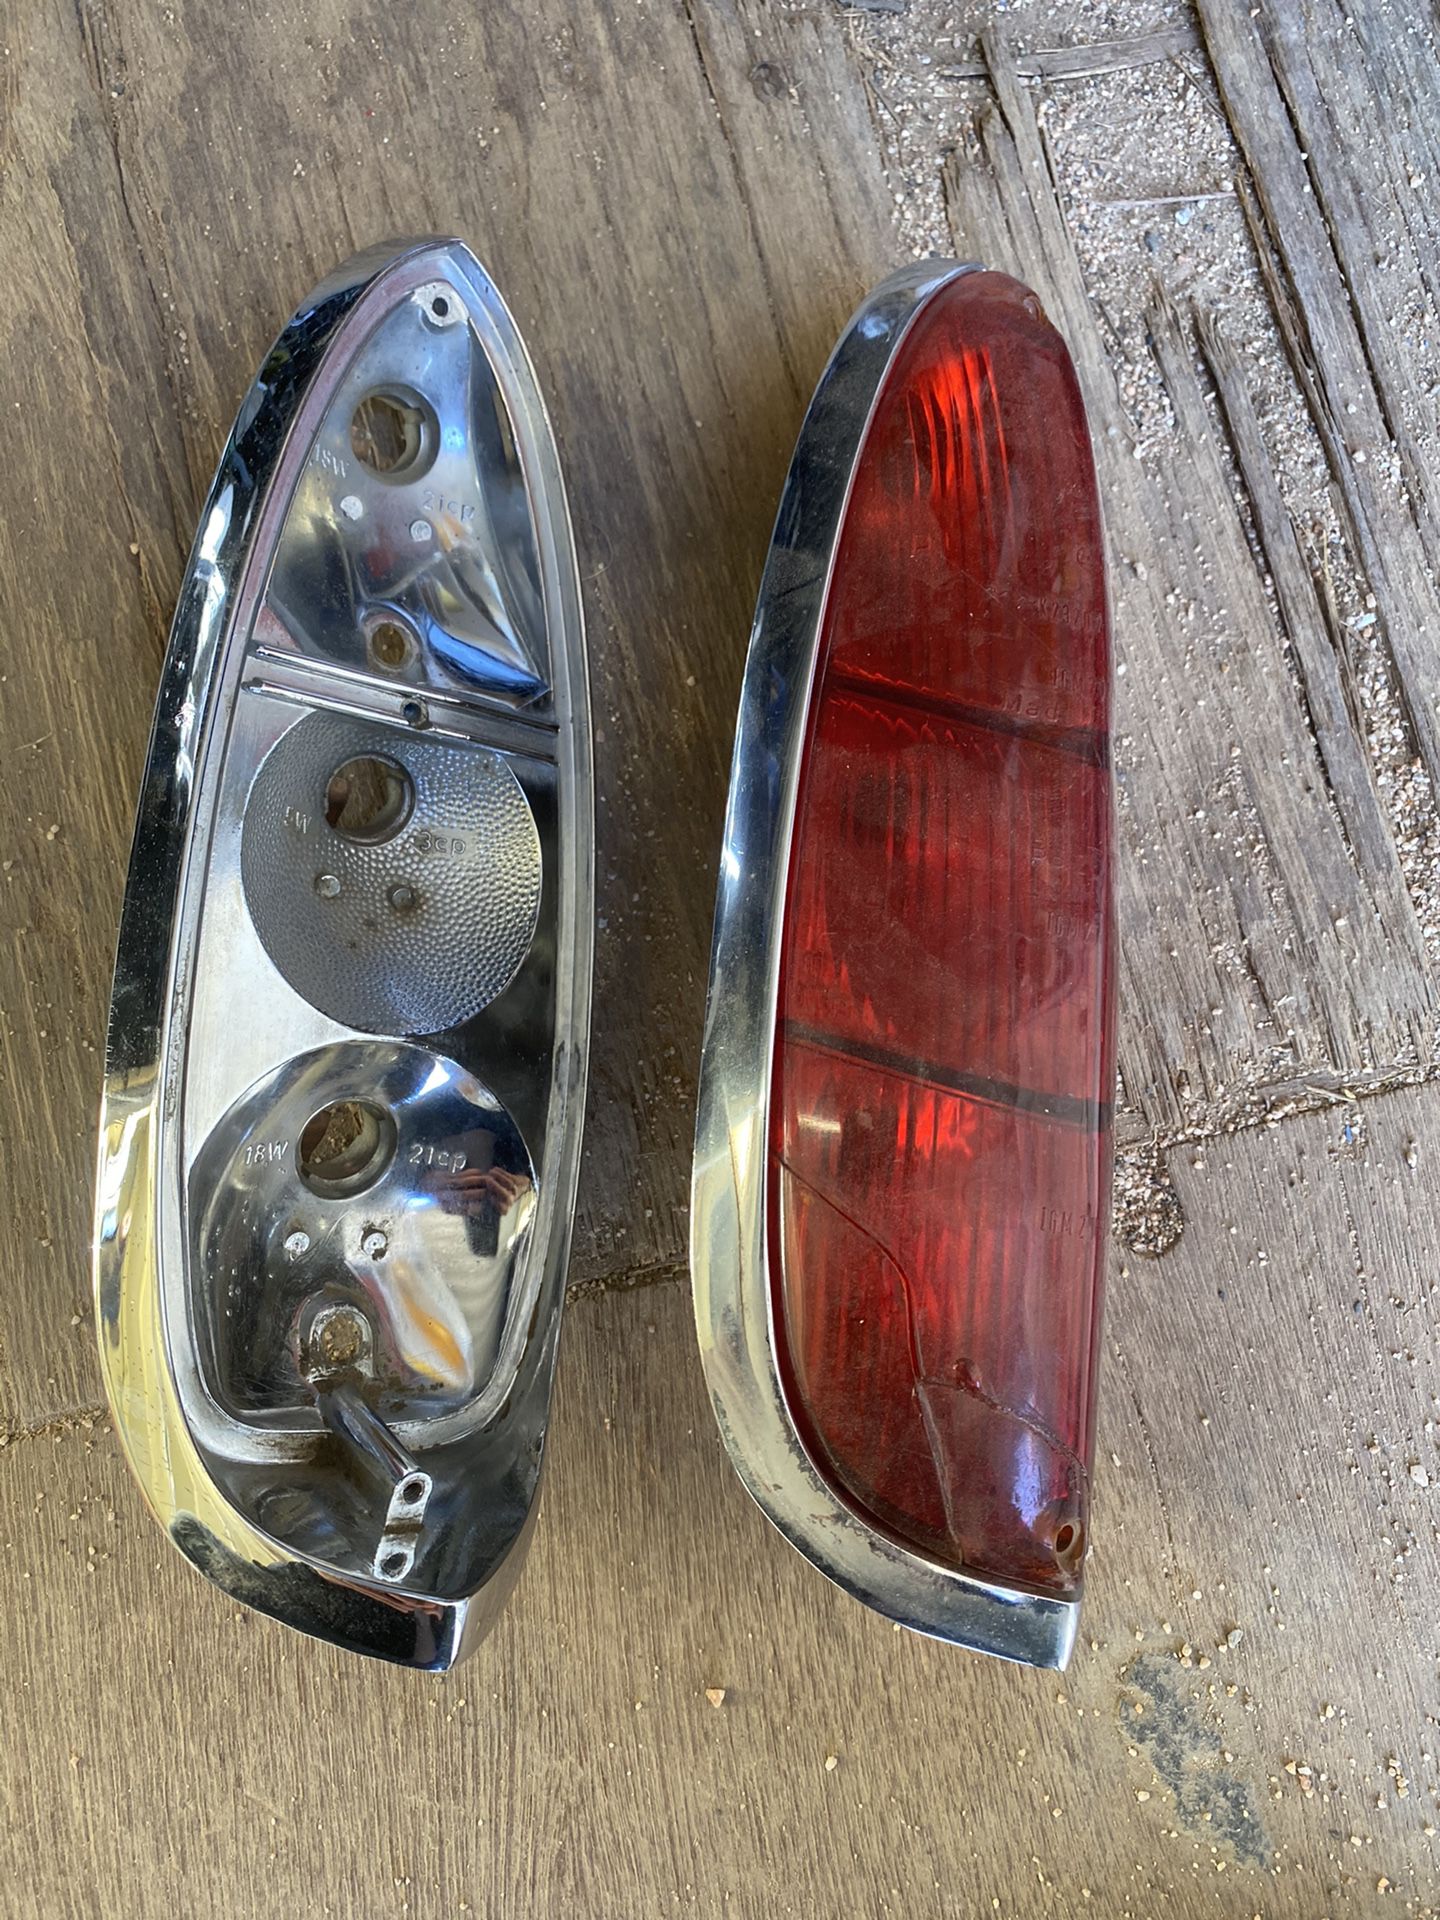 Vw early type 3 taillight housings